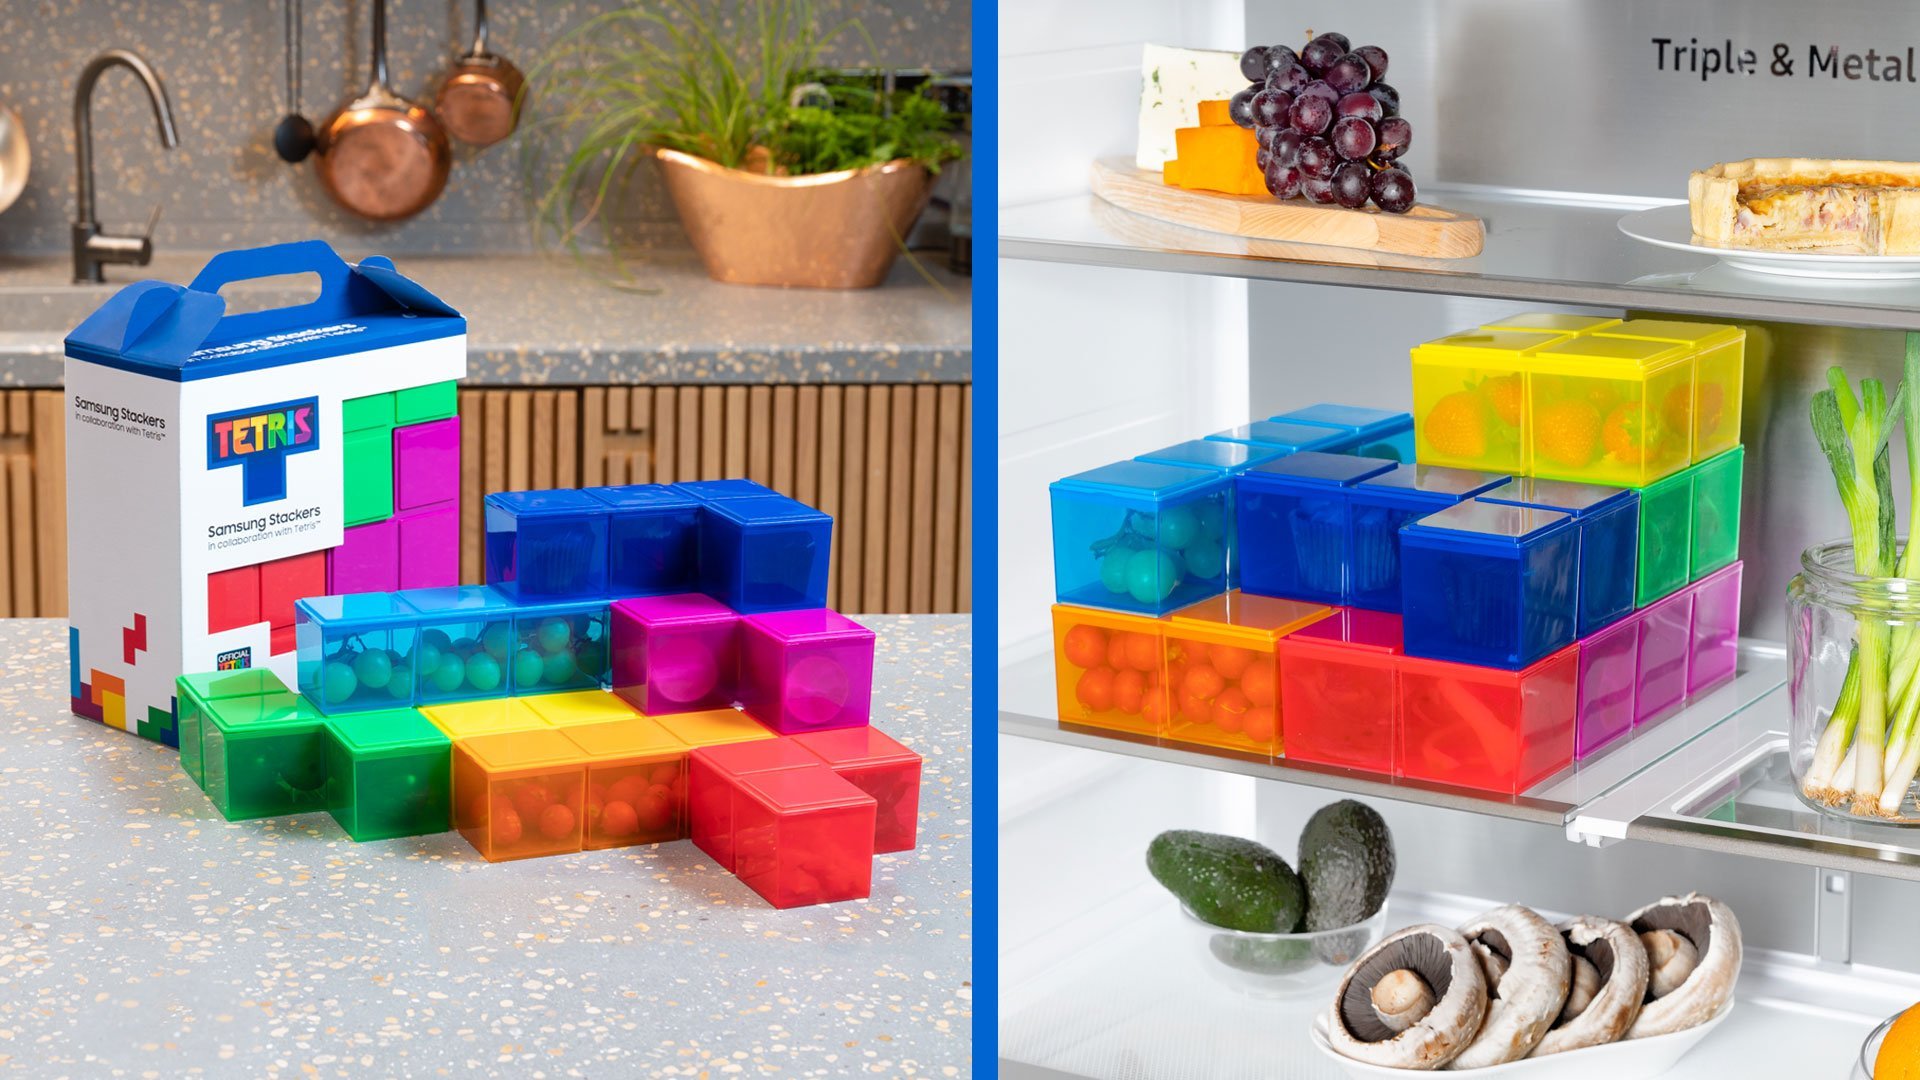 Stock your fridge with nostalgia: Samsung partners with Tetris to create 'Samsung Stackers'